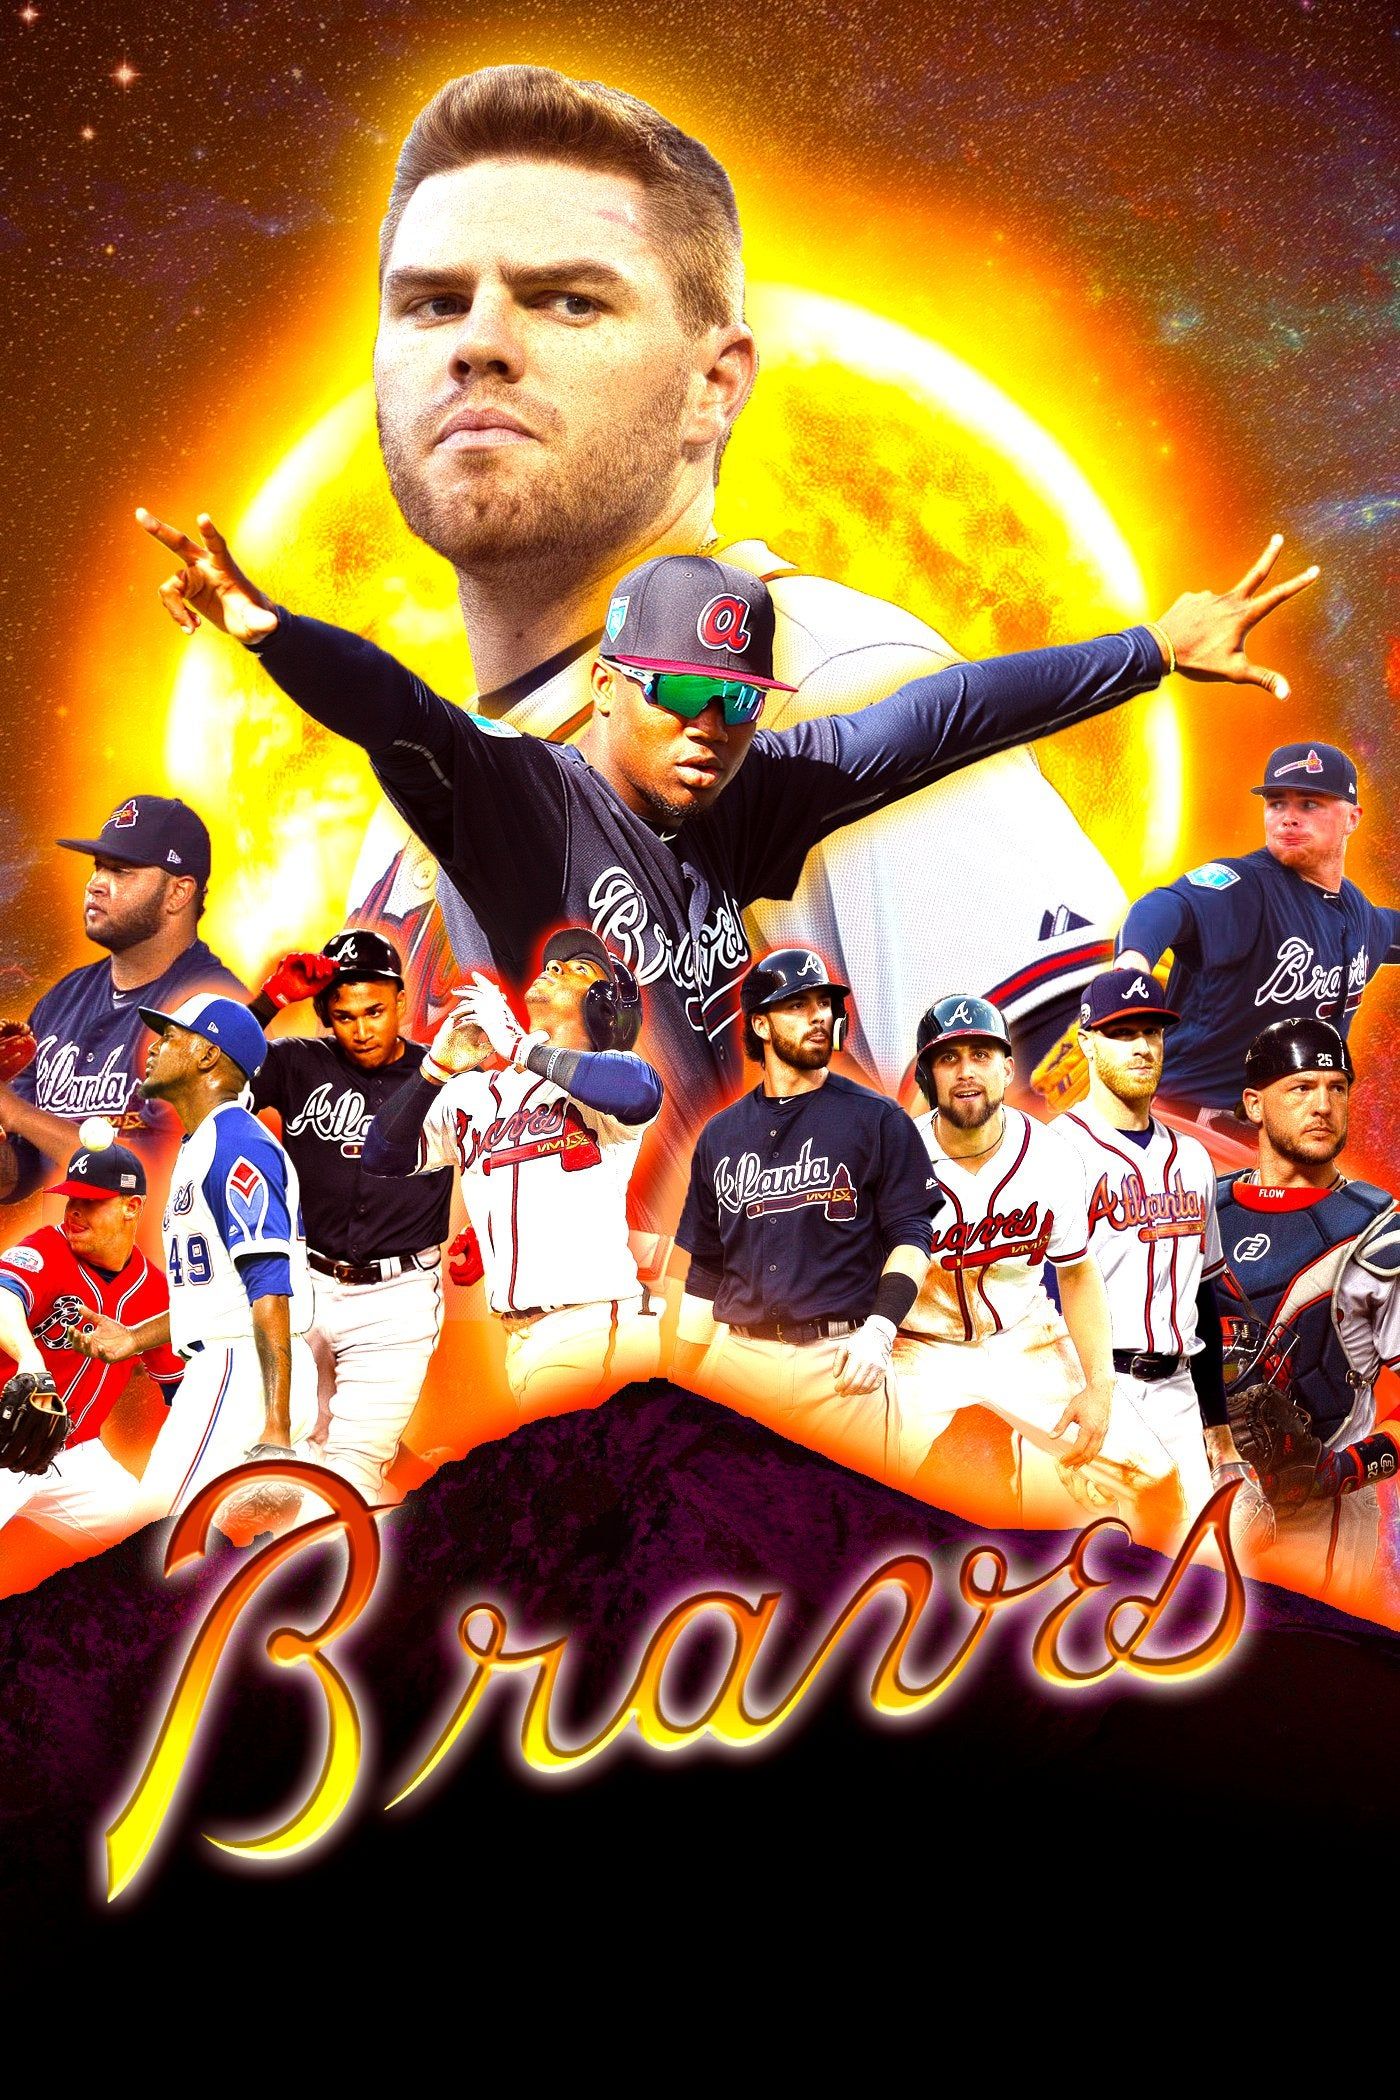 An Archive of Braves wallpaper, gifs and graphics that I've made over the past few years